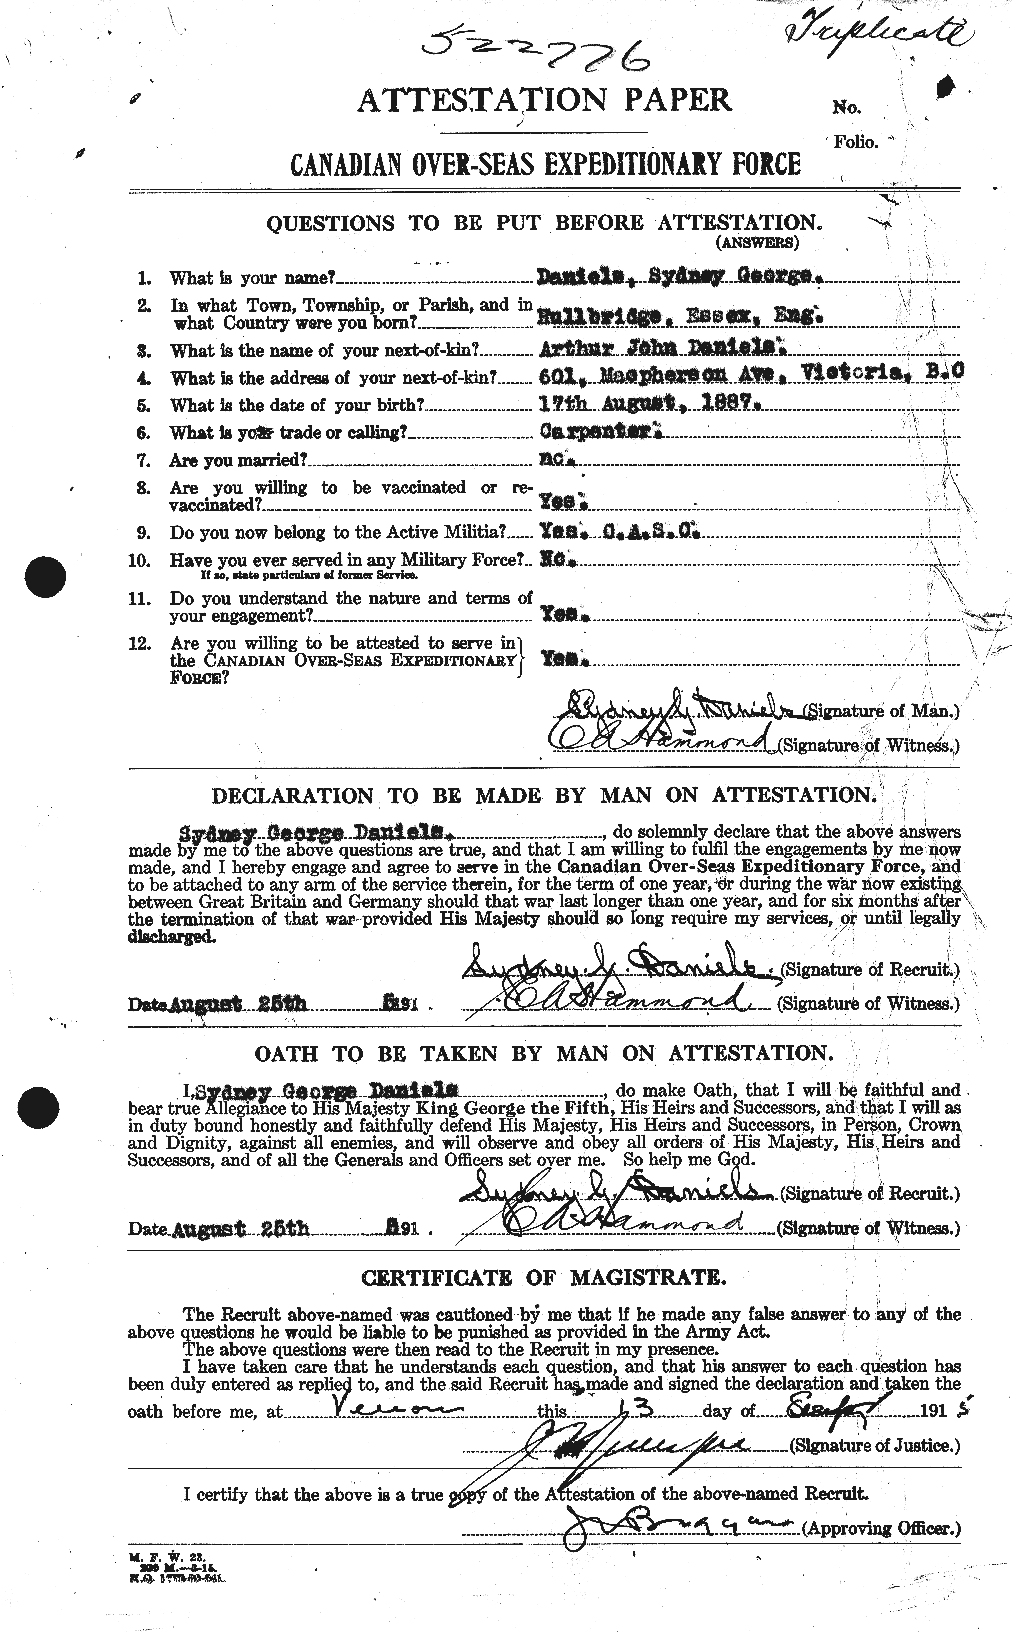 Personnel Records of the First World War - CEF 279675a